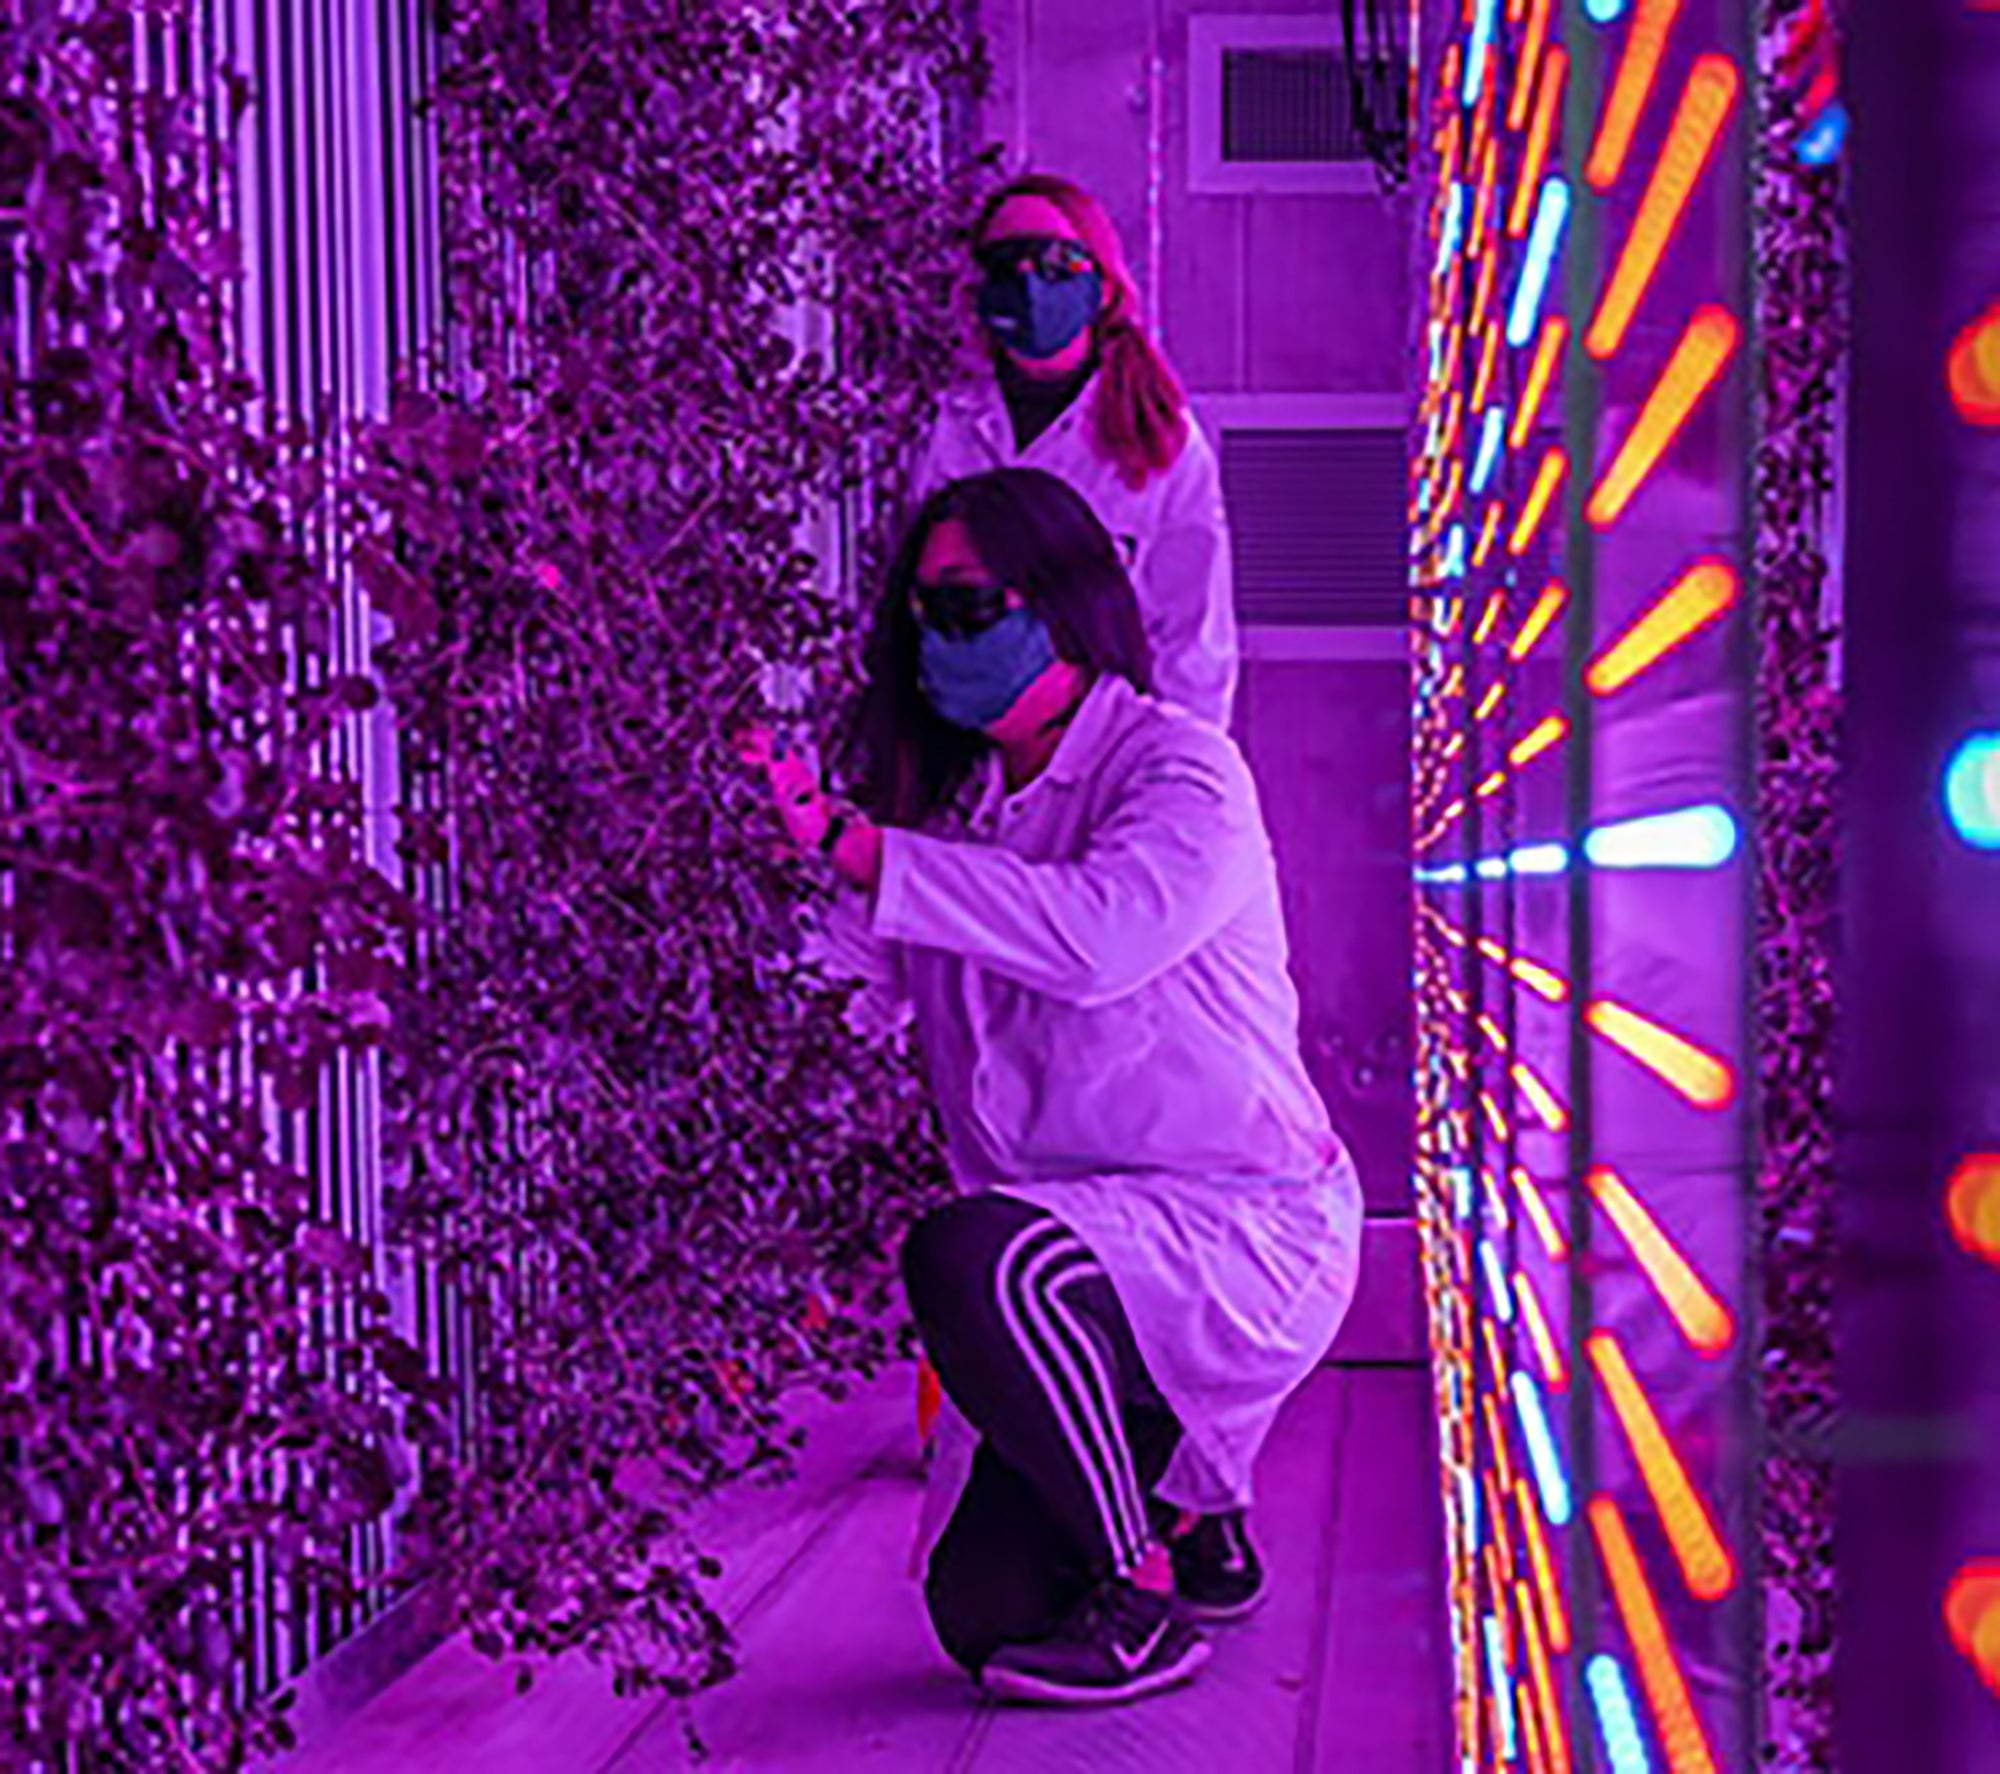 people looking at a vertical planter with purple lights surrounding them